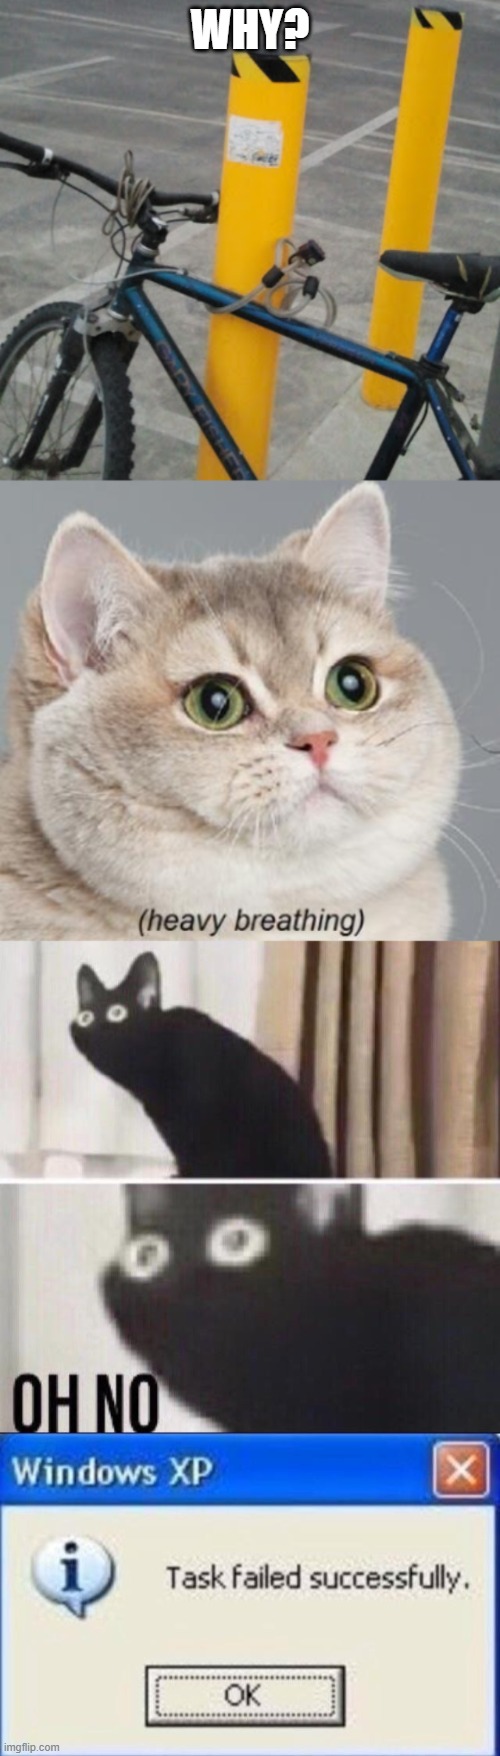 No no no please no | WHY? | image tagged in memes,heavy breathing cat,task failed successfully,oh no cat | made w/ Imgflip meme maker